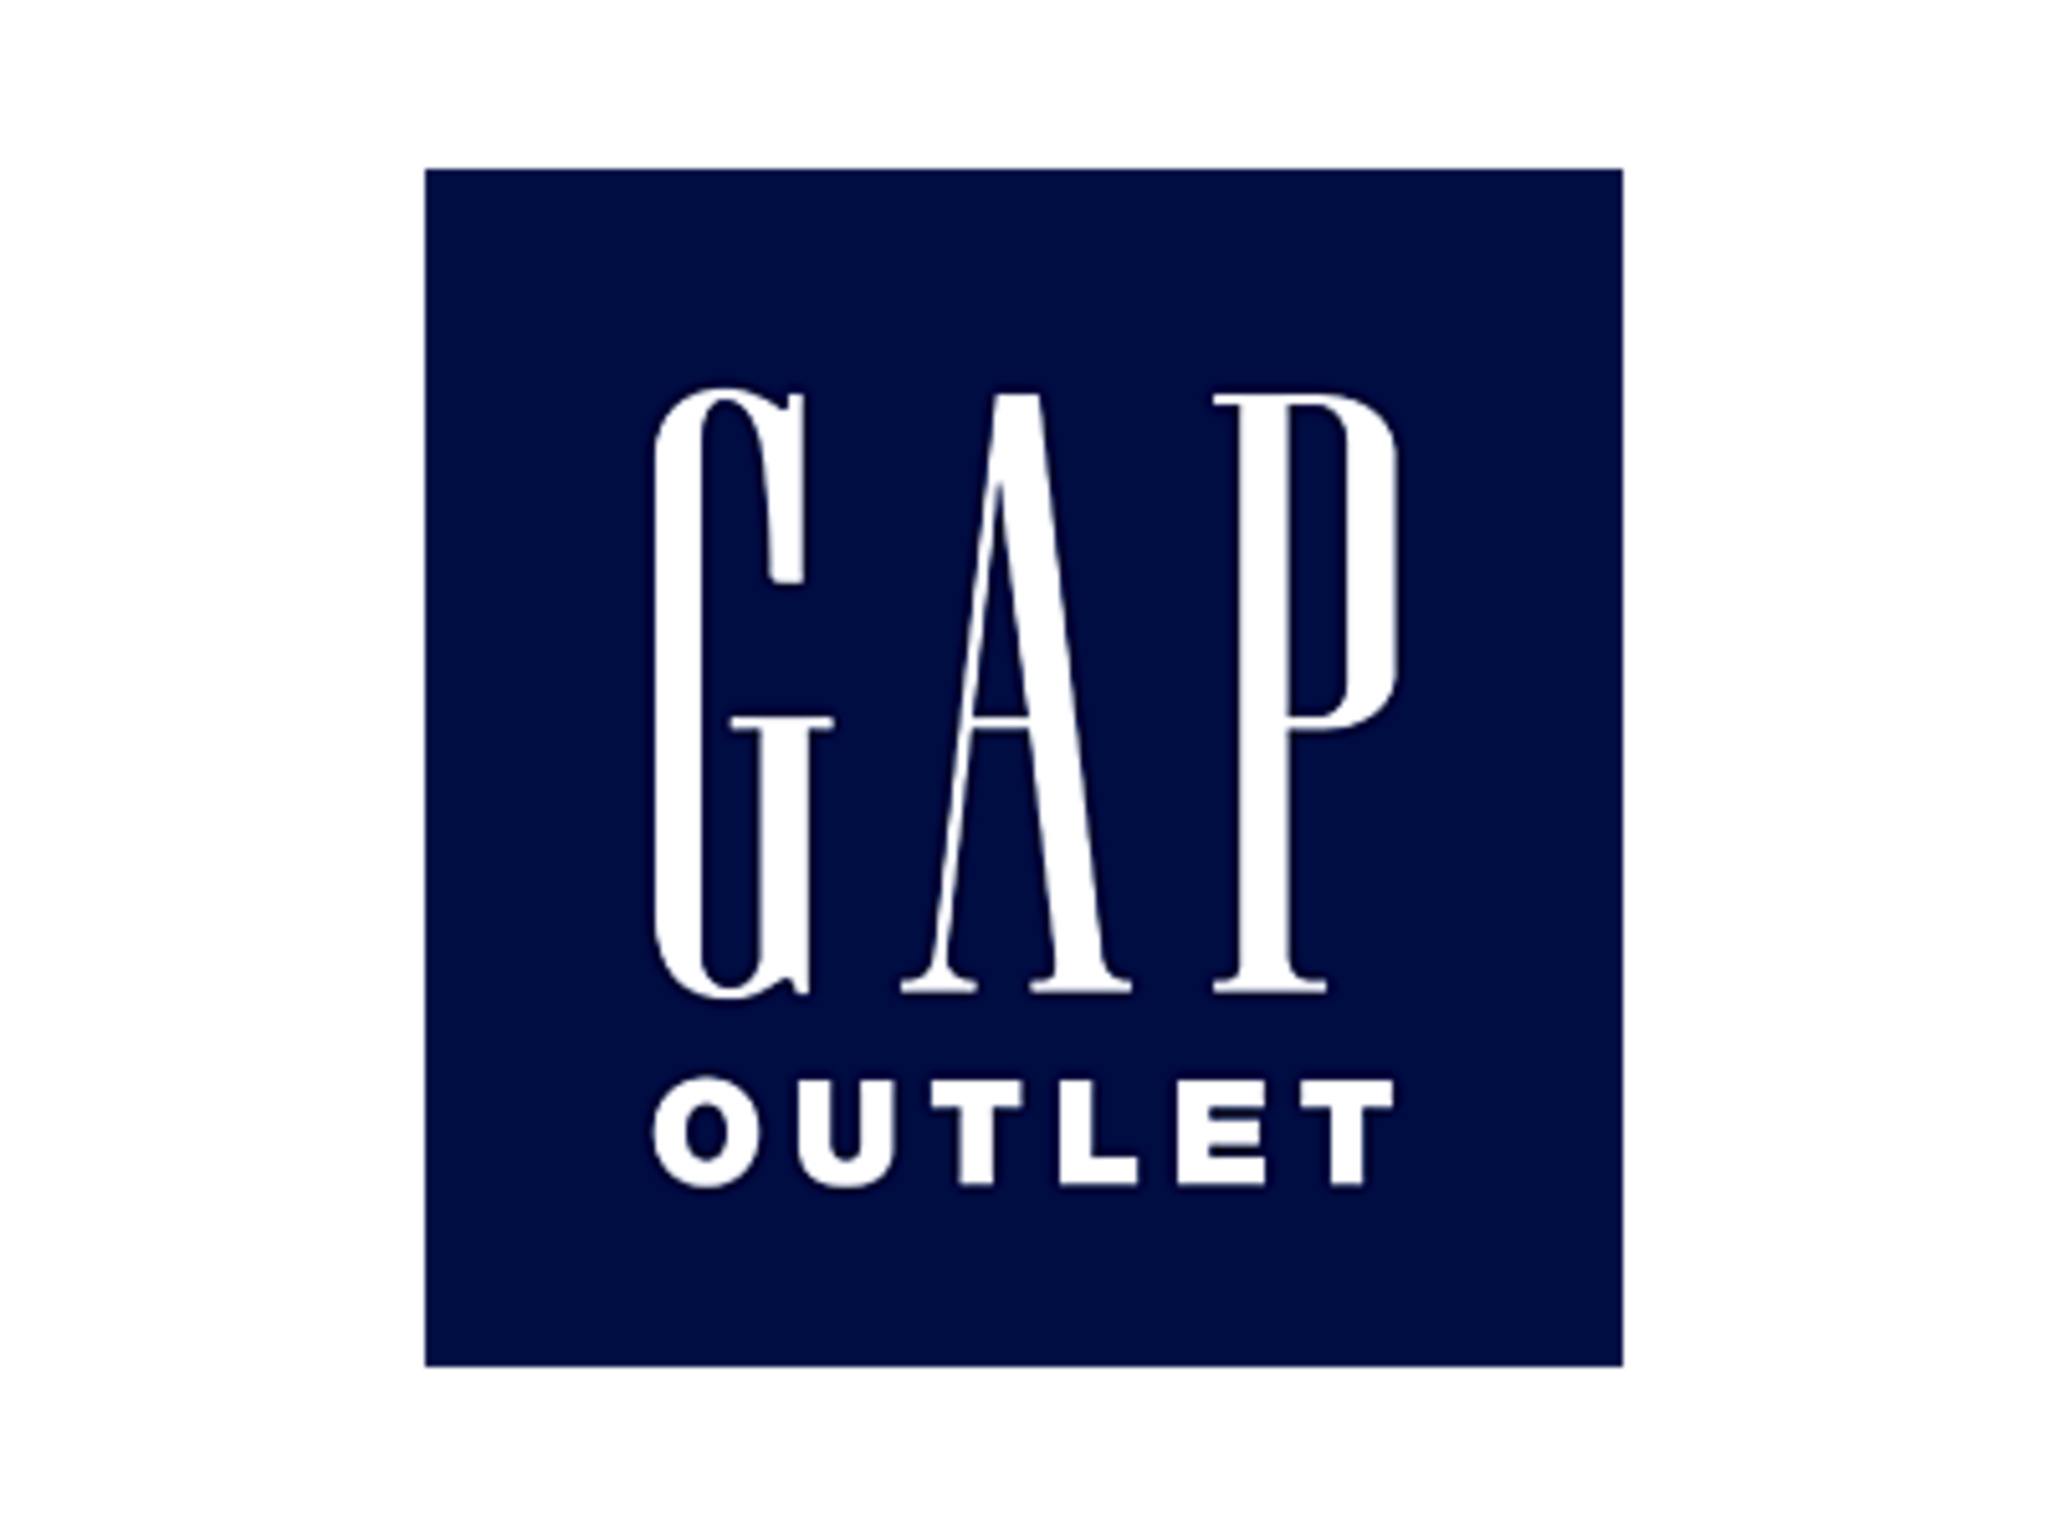 GAP Outlet 島忠ホームズ草加舎人店の代表写真10